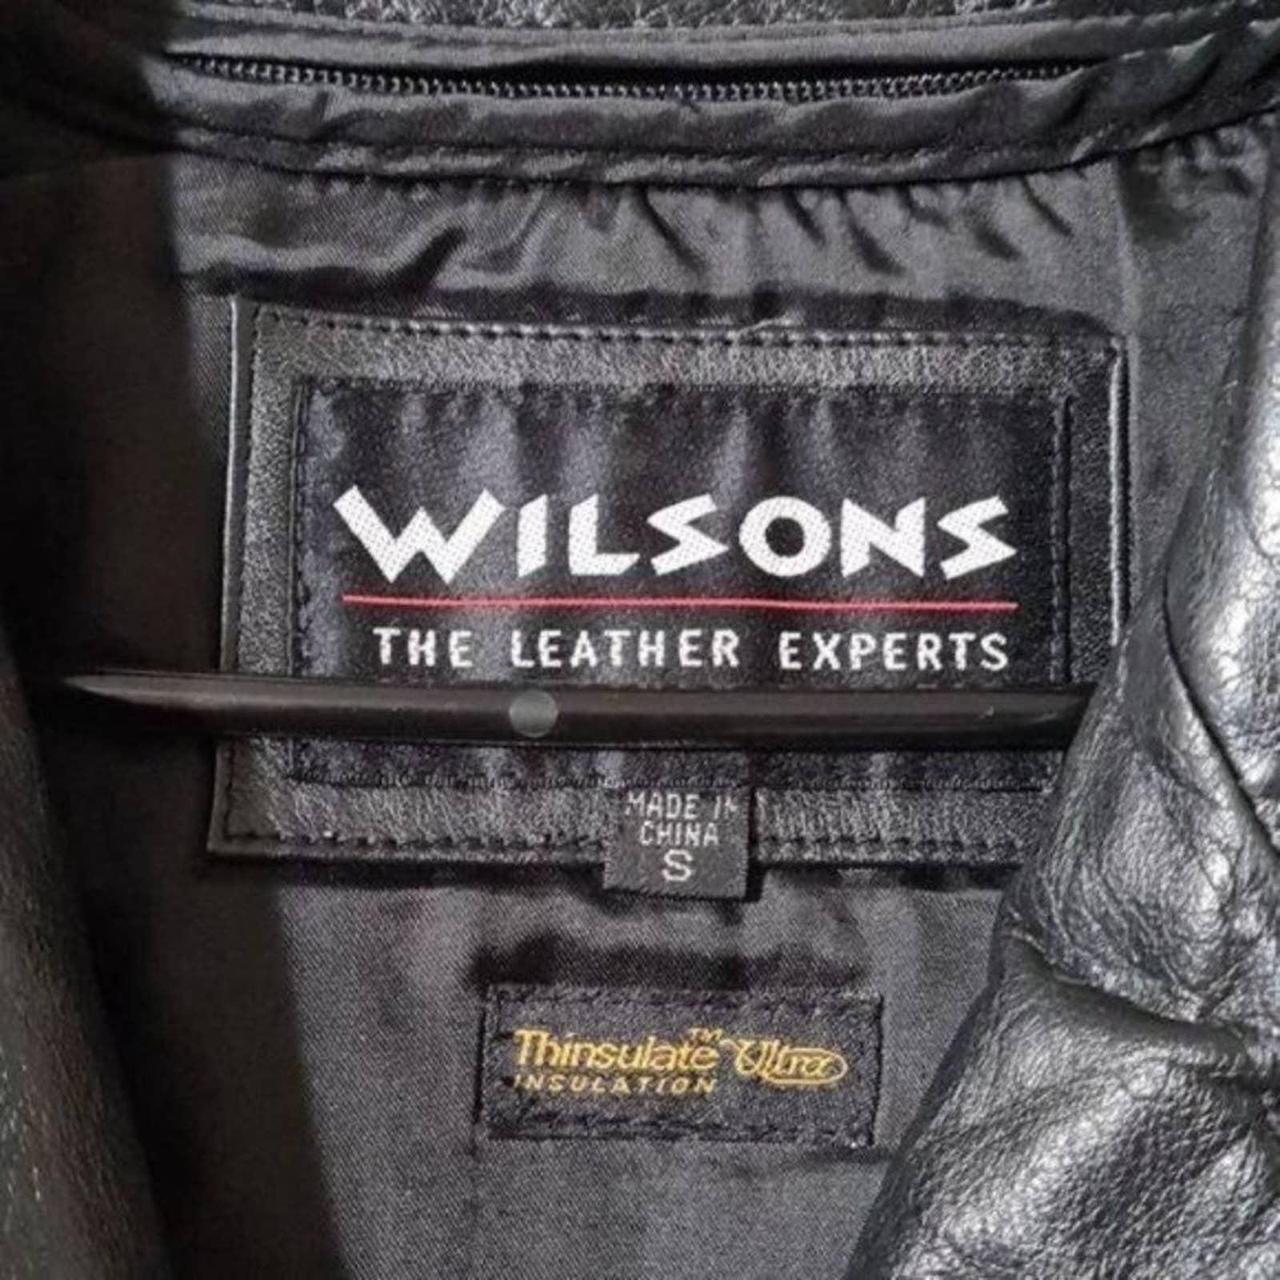 Product Image 3 - Wilsons Leather Jacket Small Black
snap